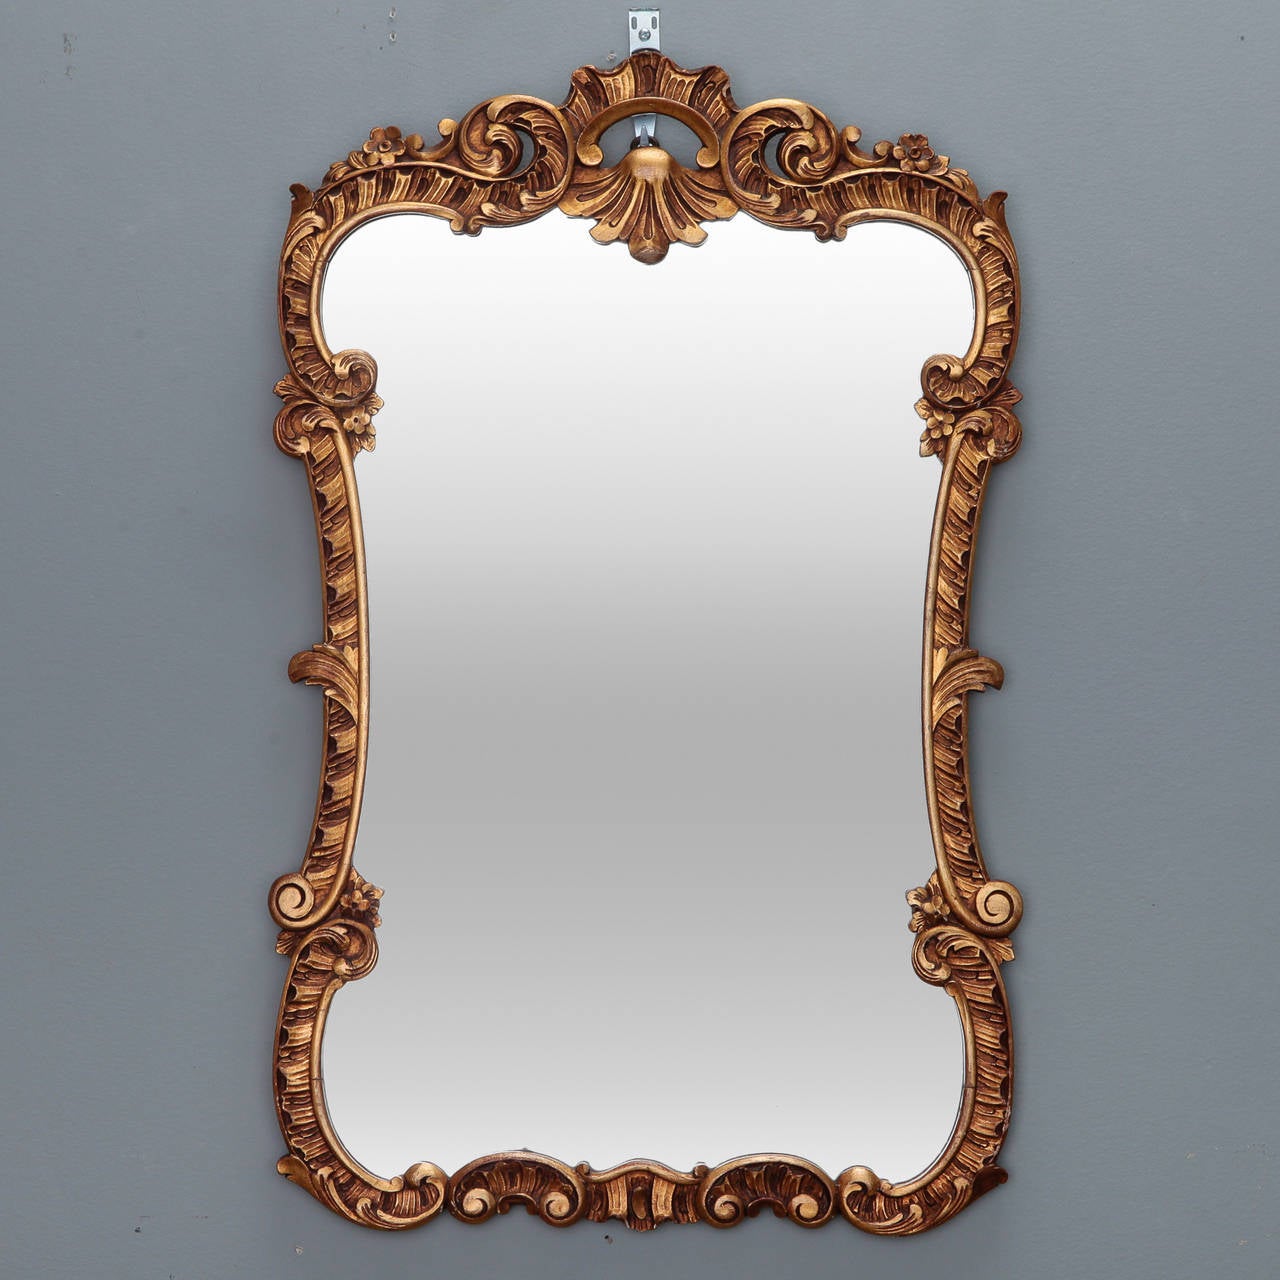 Circa 1930s Italian gilt wood frame mirror with fancy scrolled frame with floral and foliate details and shell form crest.